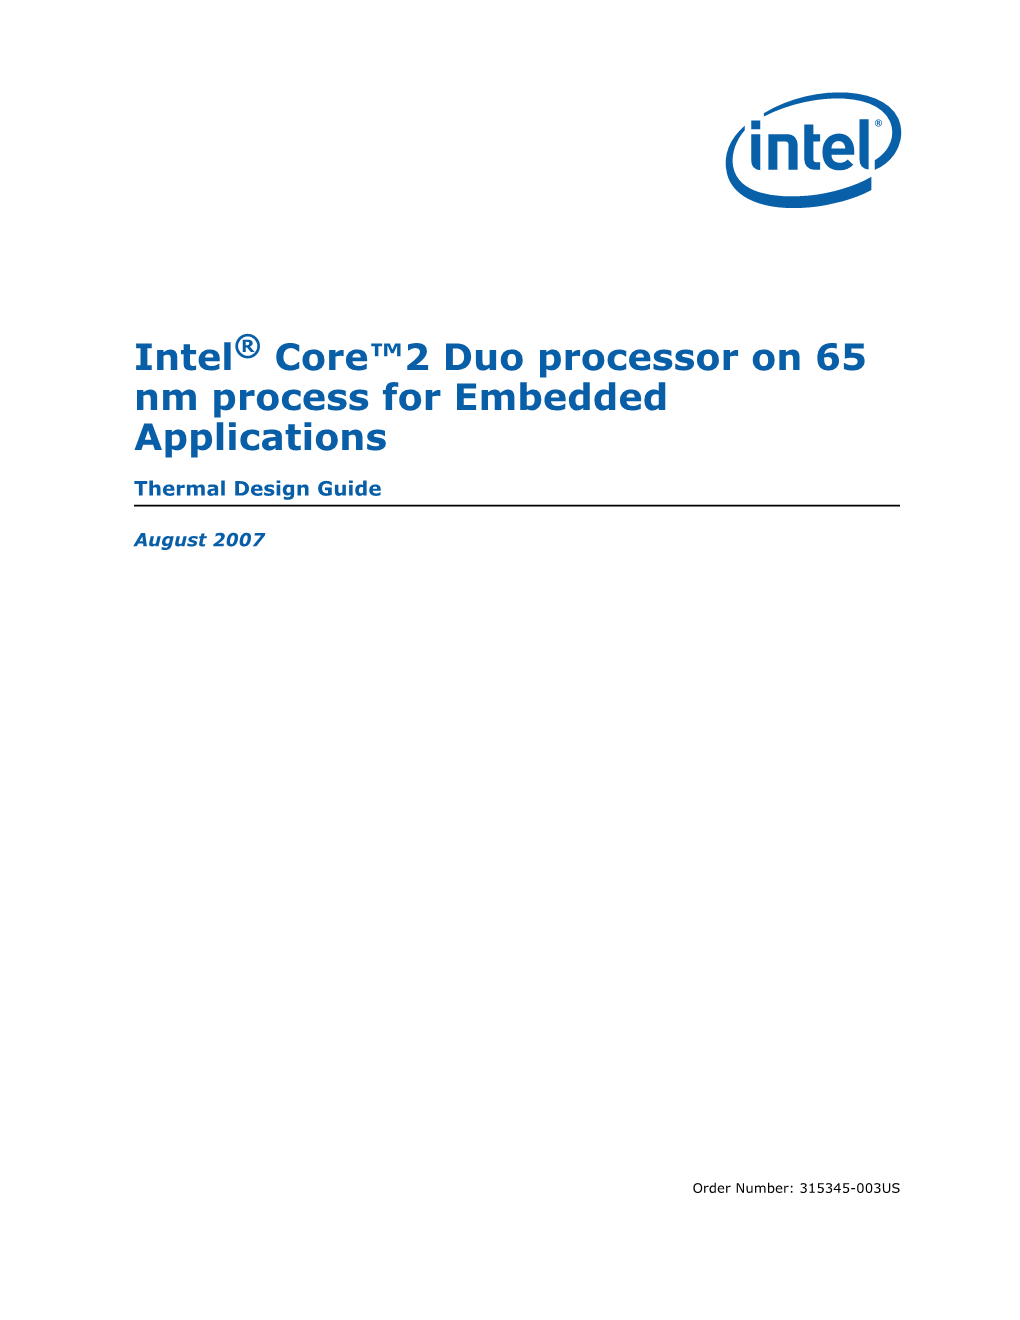 Intel® Core™2 Duo Processor on 65 Nm Process for Embedded Applications